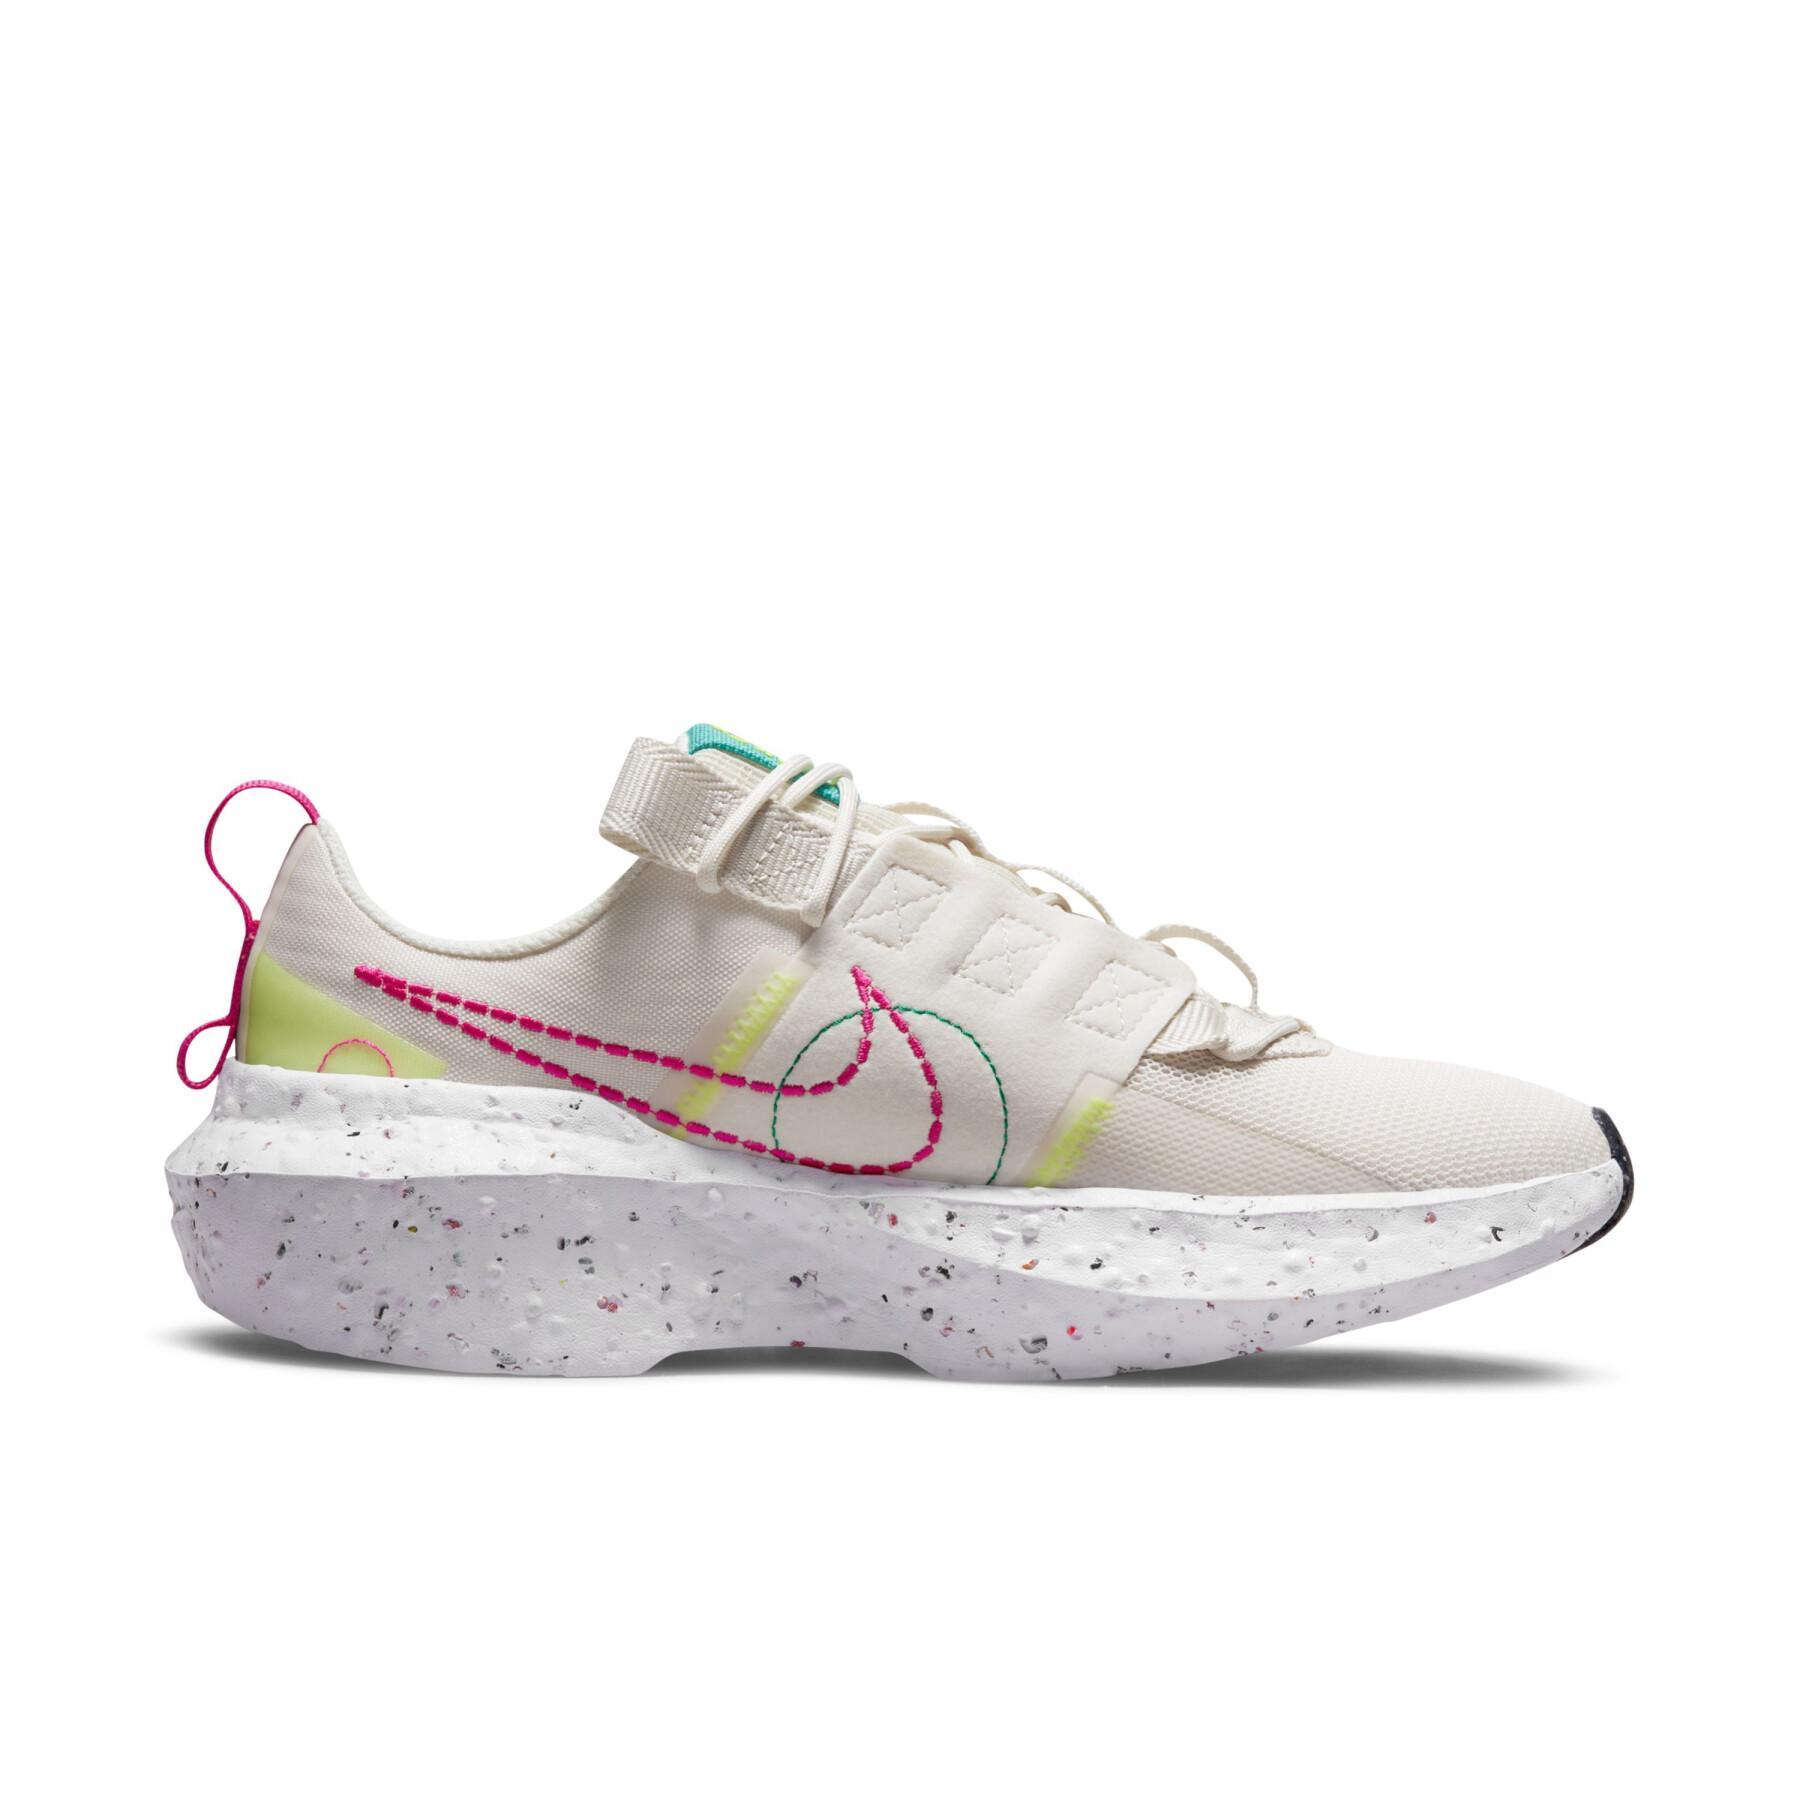 Baskets femme Nike Crater Impact